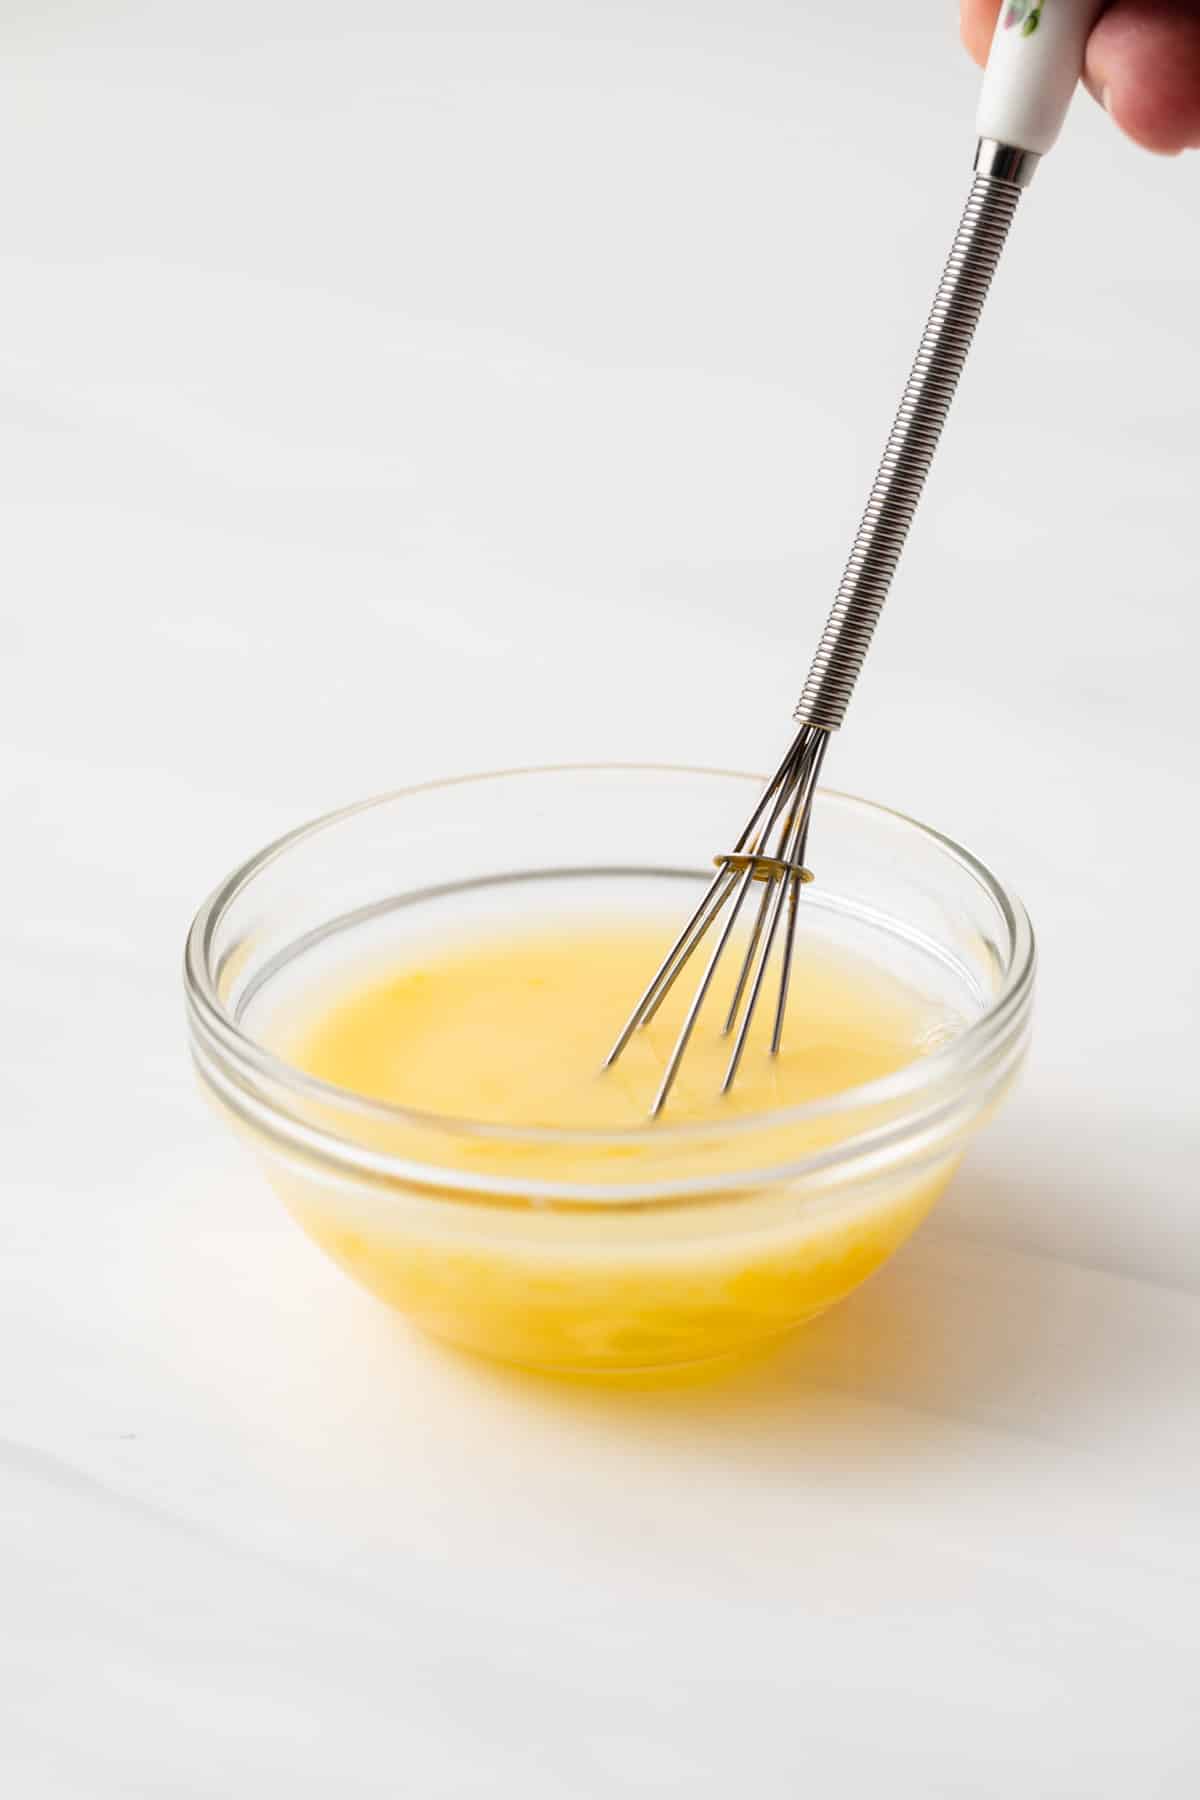 Whisking egg and water together.